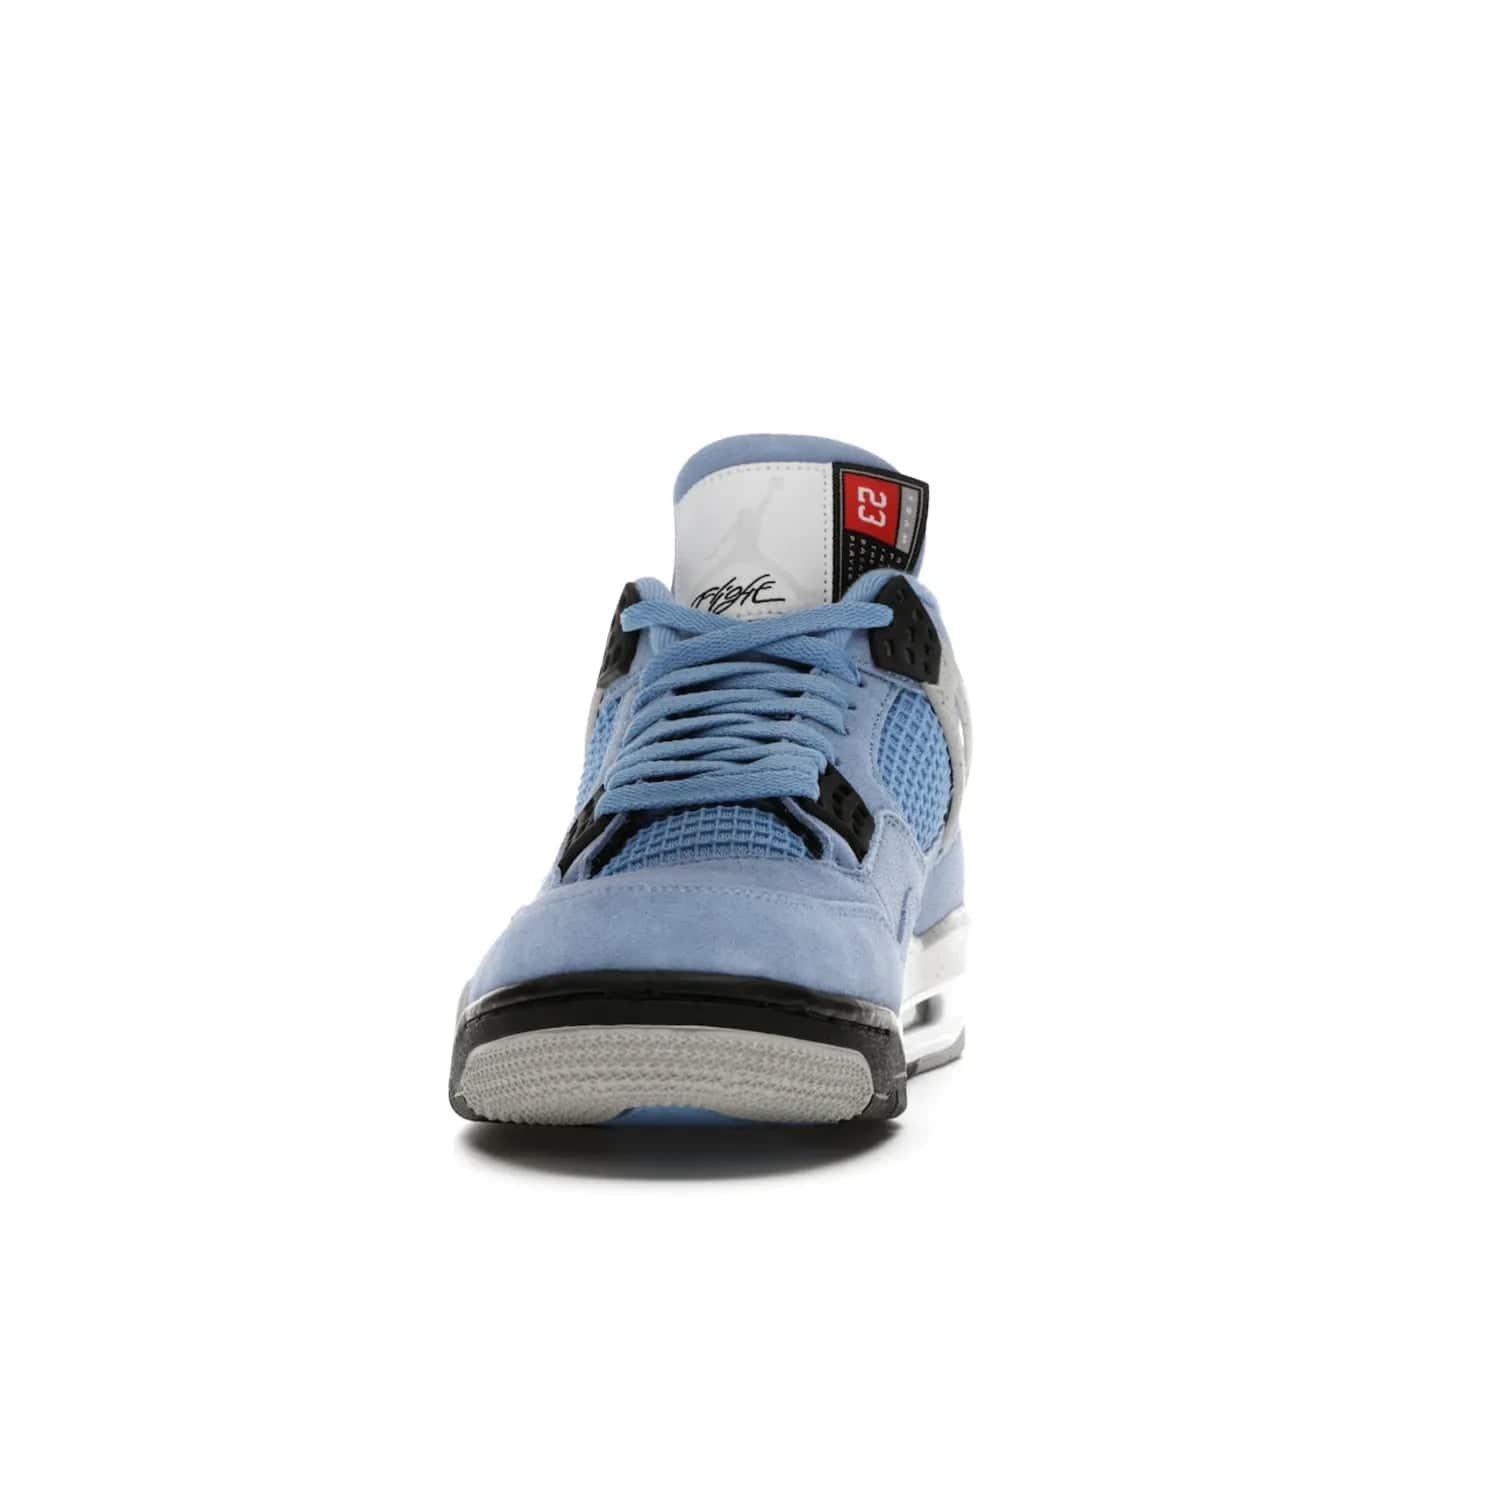 Jordan 4 Retro University Blue - Image 11 - Only at www.BallersClubKickz.com - The Air Jordan 4 University Blue honors MJ's alma mater. Rich University Blue suede, panels of netting, and Cement Grey speckled eyelets give this design an edgy look. Features a black, white and Tech Grey sole with a clear Air unit and two woven labels on the tongue. Jumpman logo & Team Jordan jock tag included. Released April 2021.